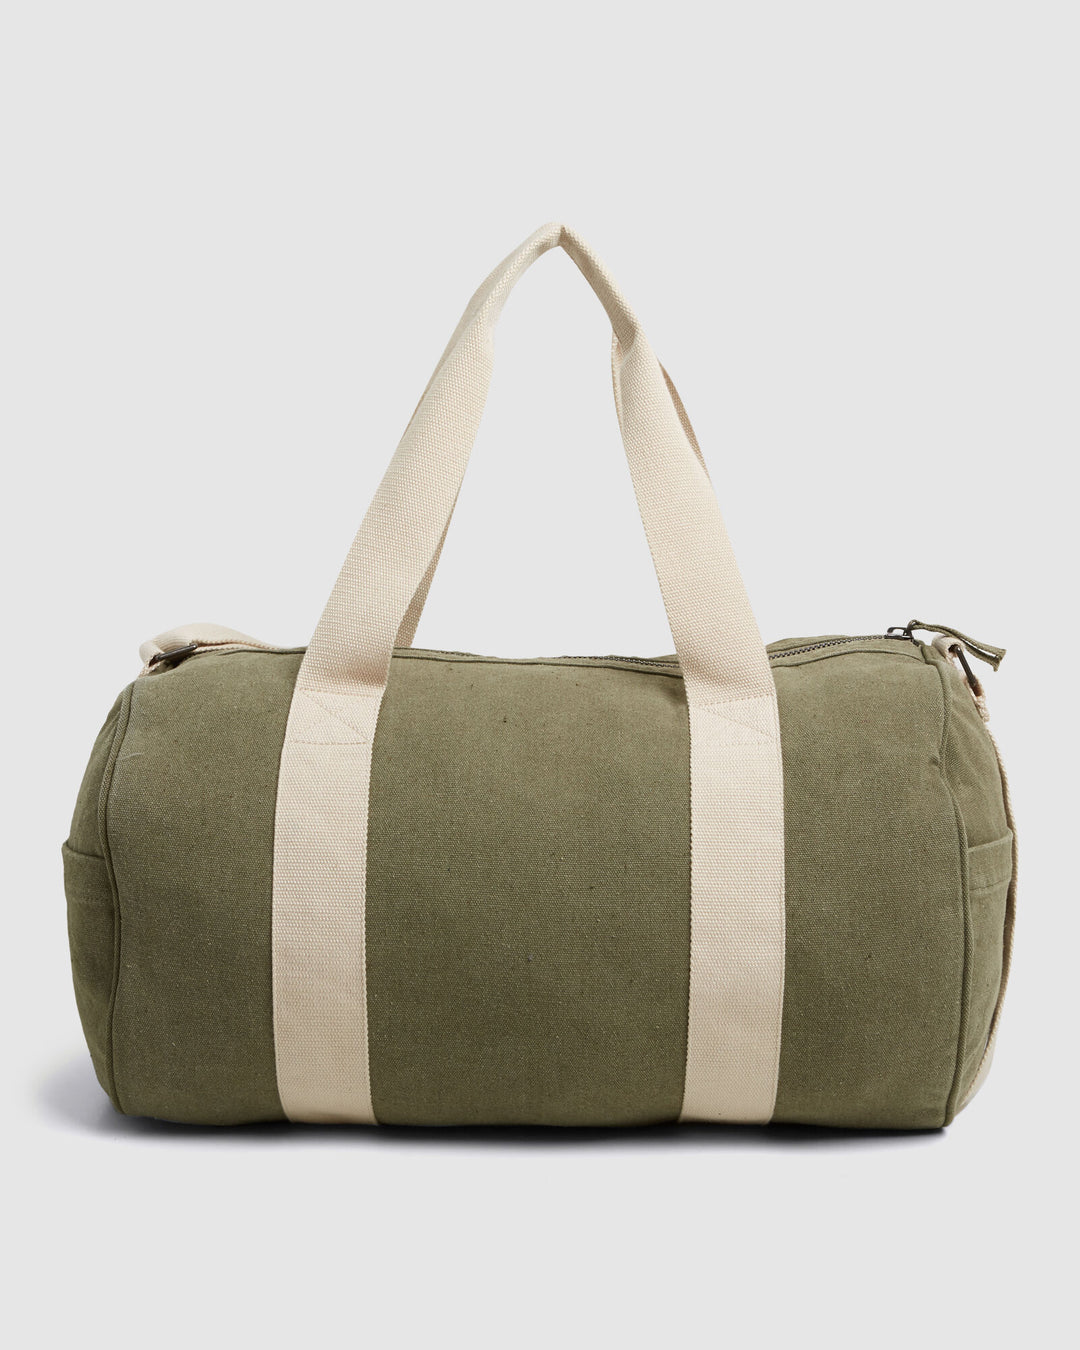 Thrills Military Road Bag - Jungle Army